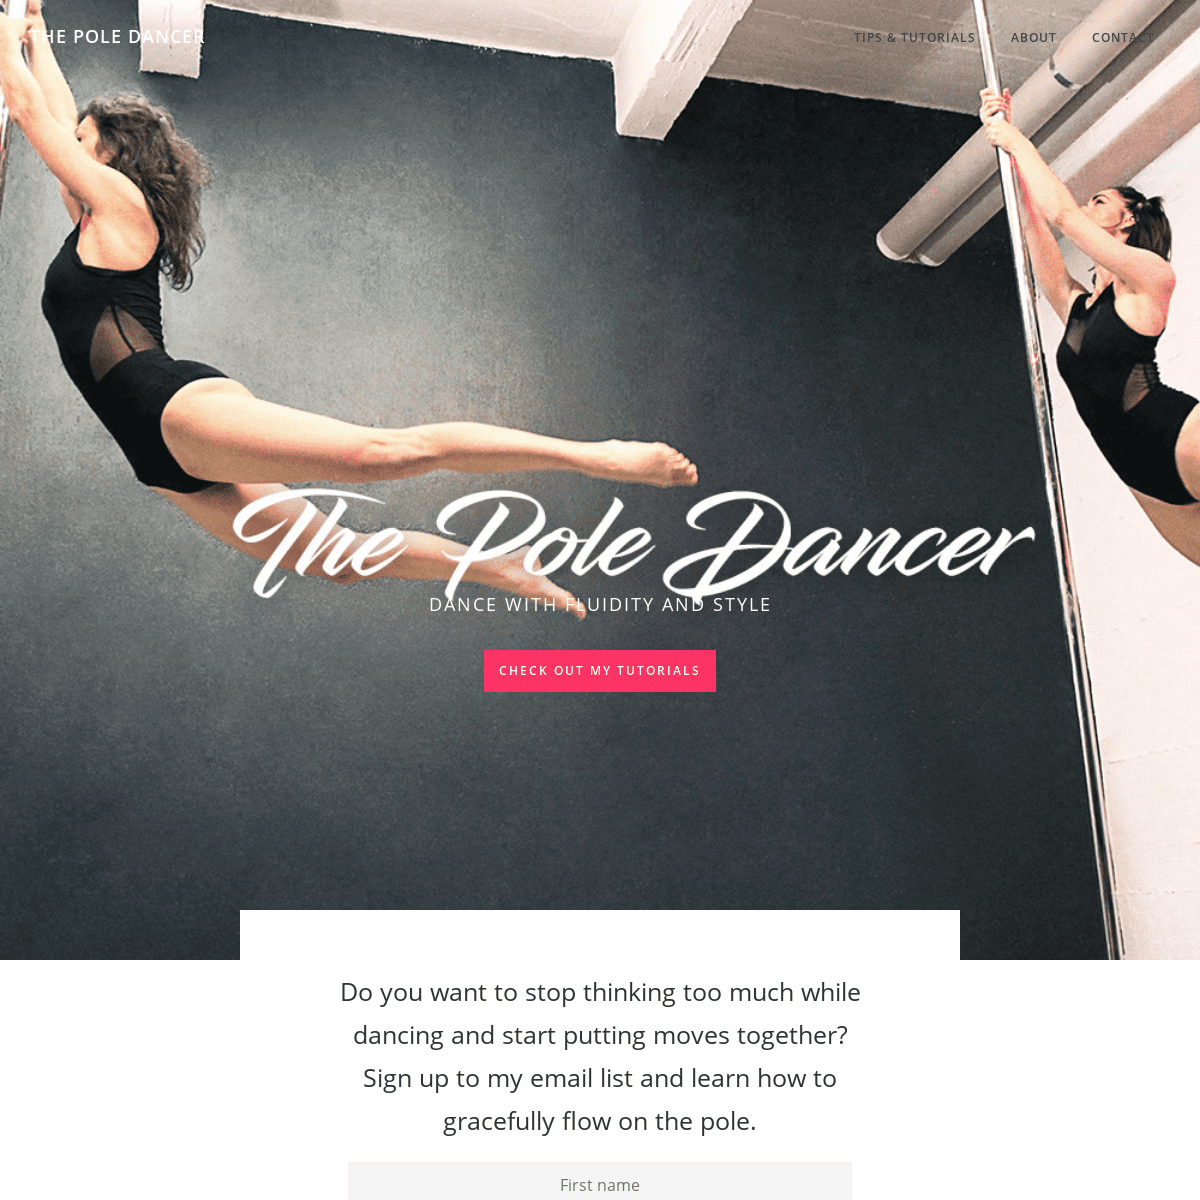 The Pole Dancer • Pole dancing tutorials for your natural flow on the pole